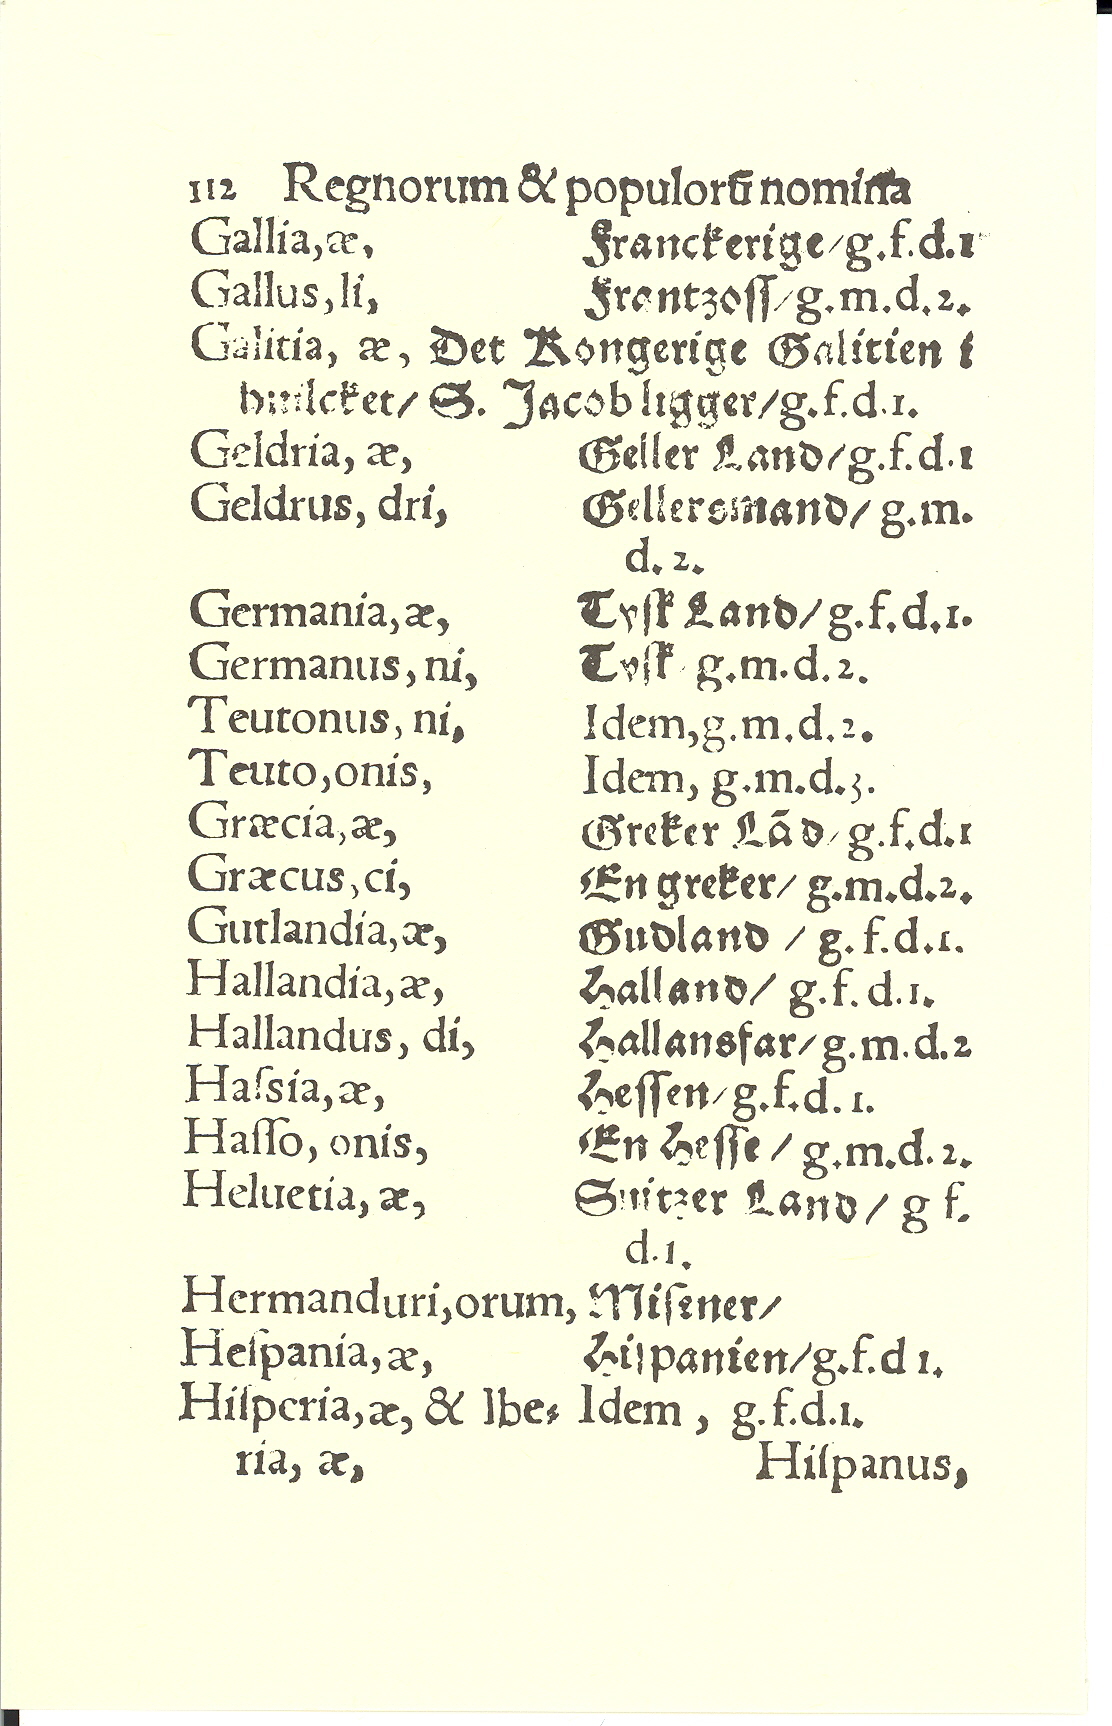 Smith 1563, Side: 11